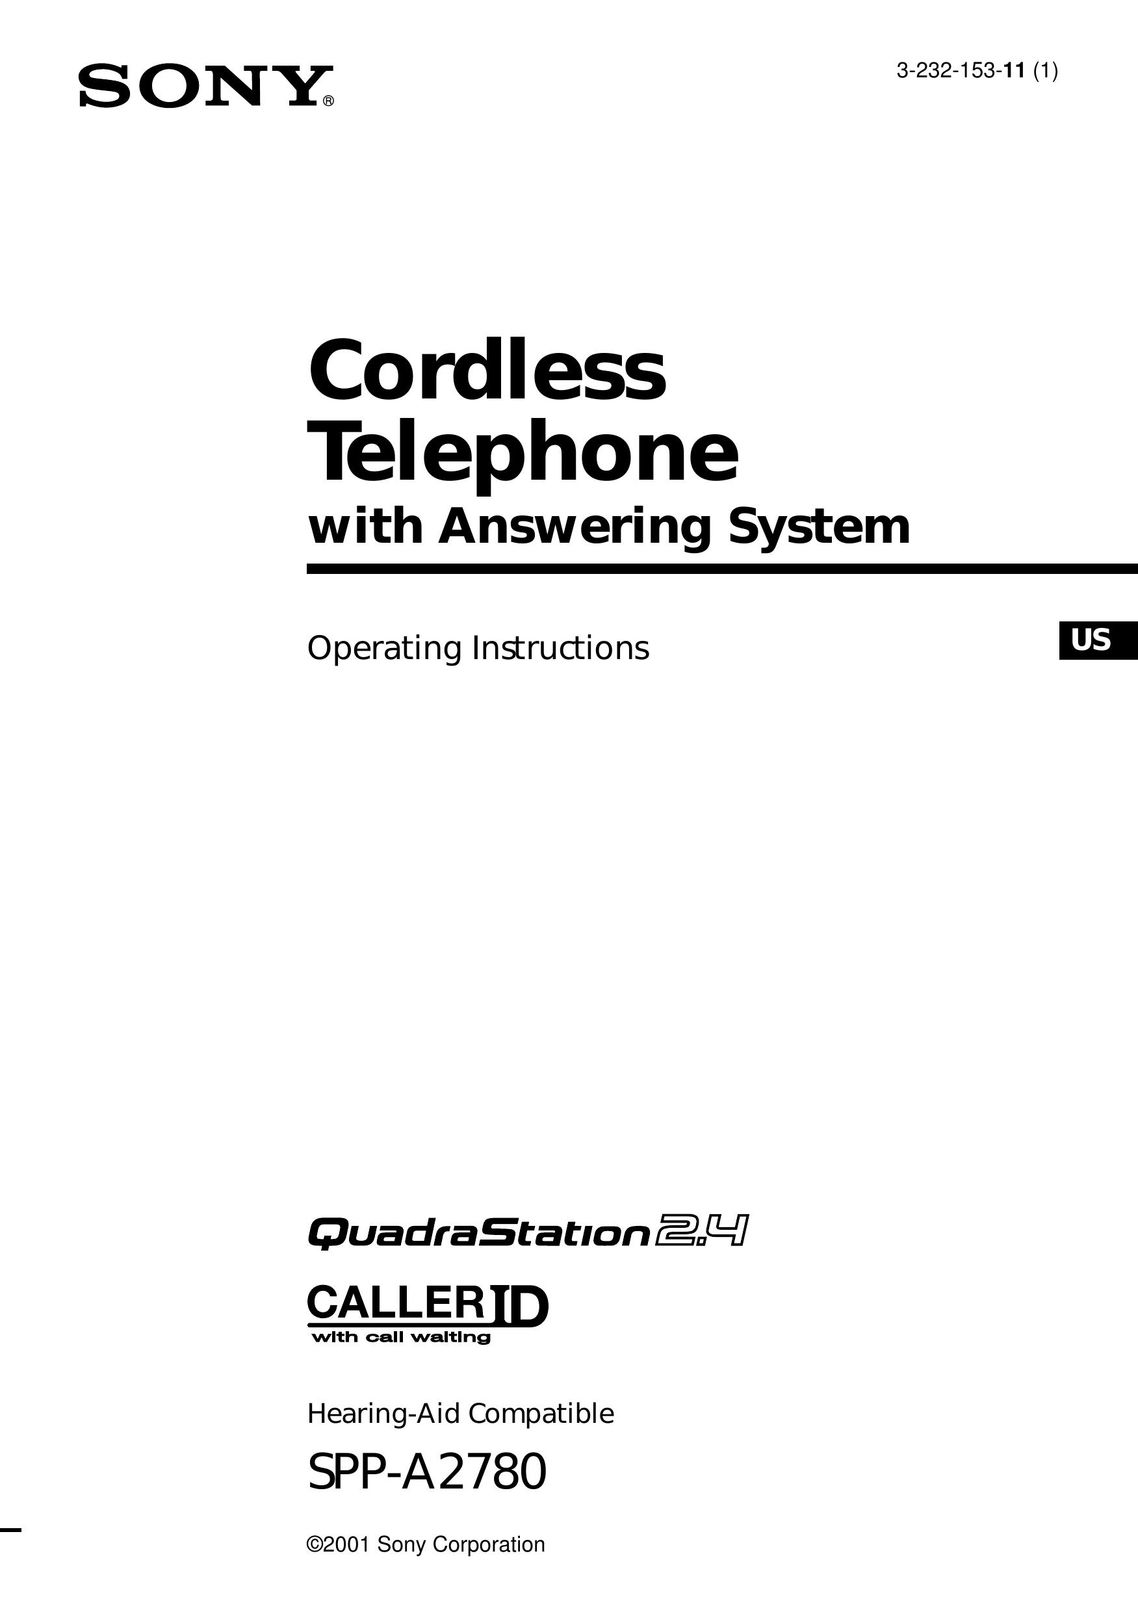 Sony PP-A2780 Cordless Telephone User Manual